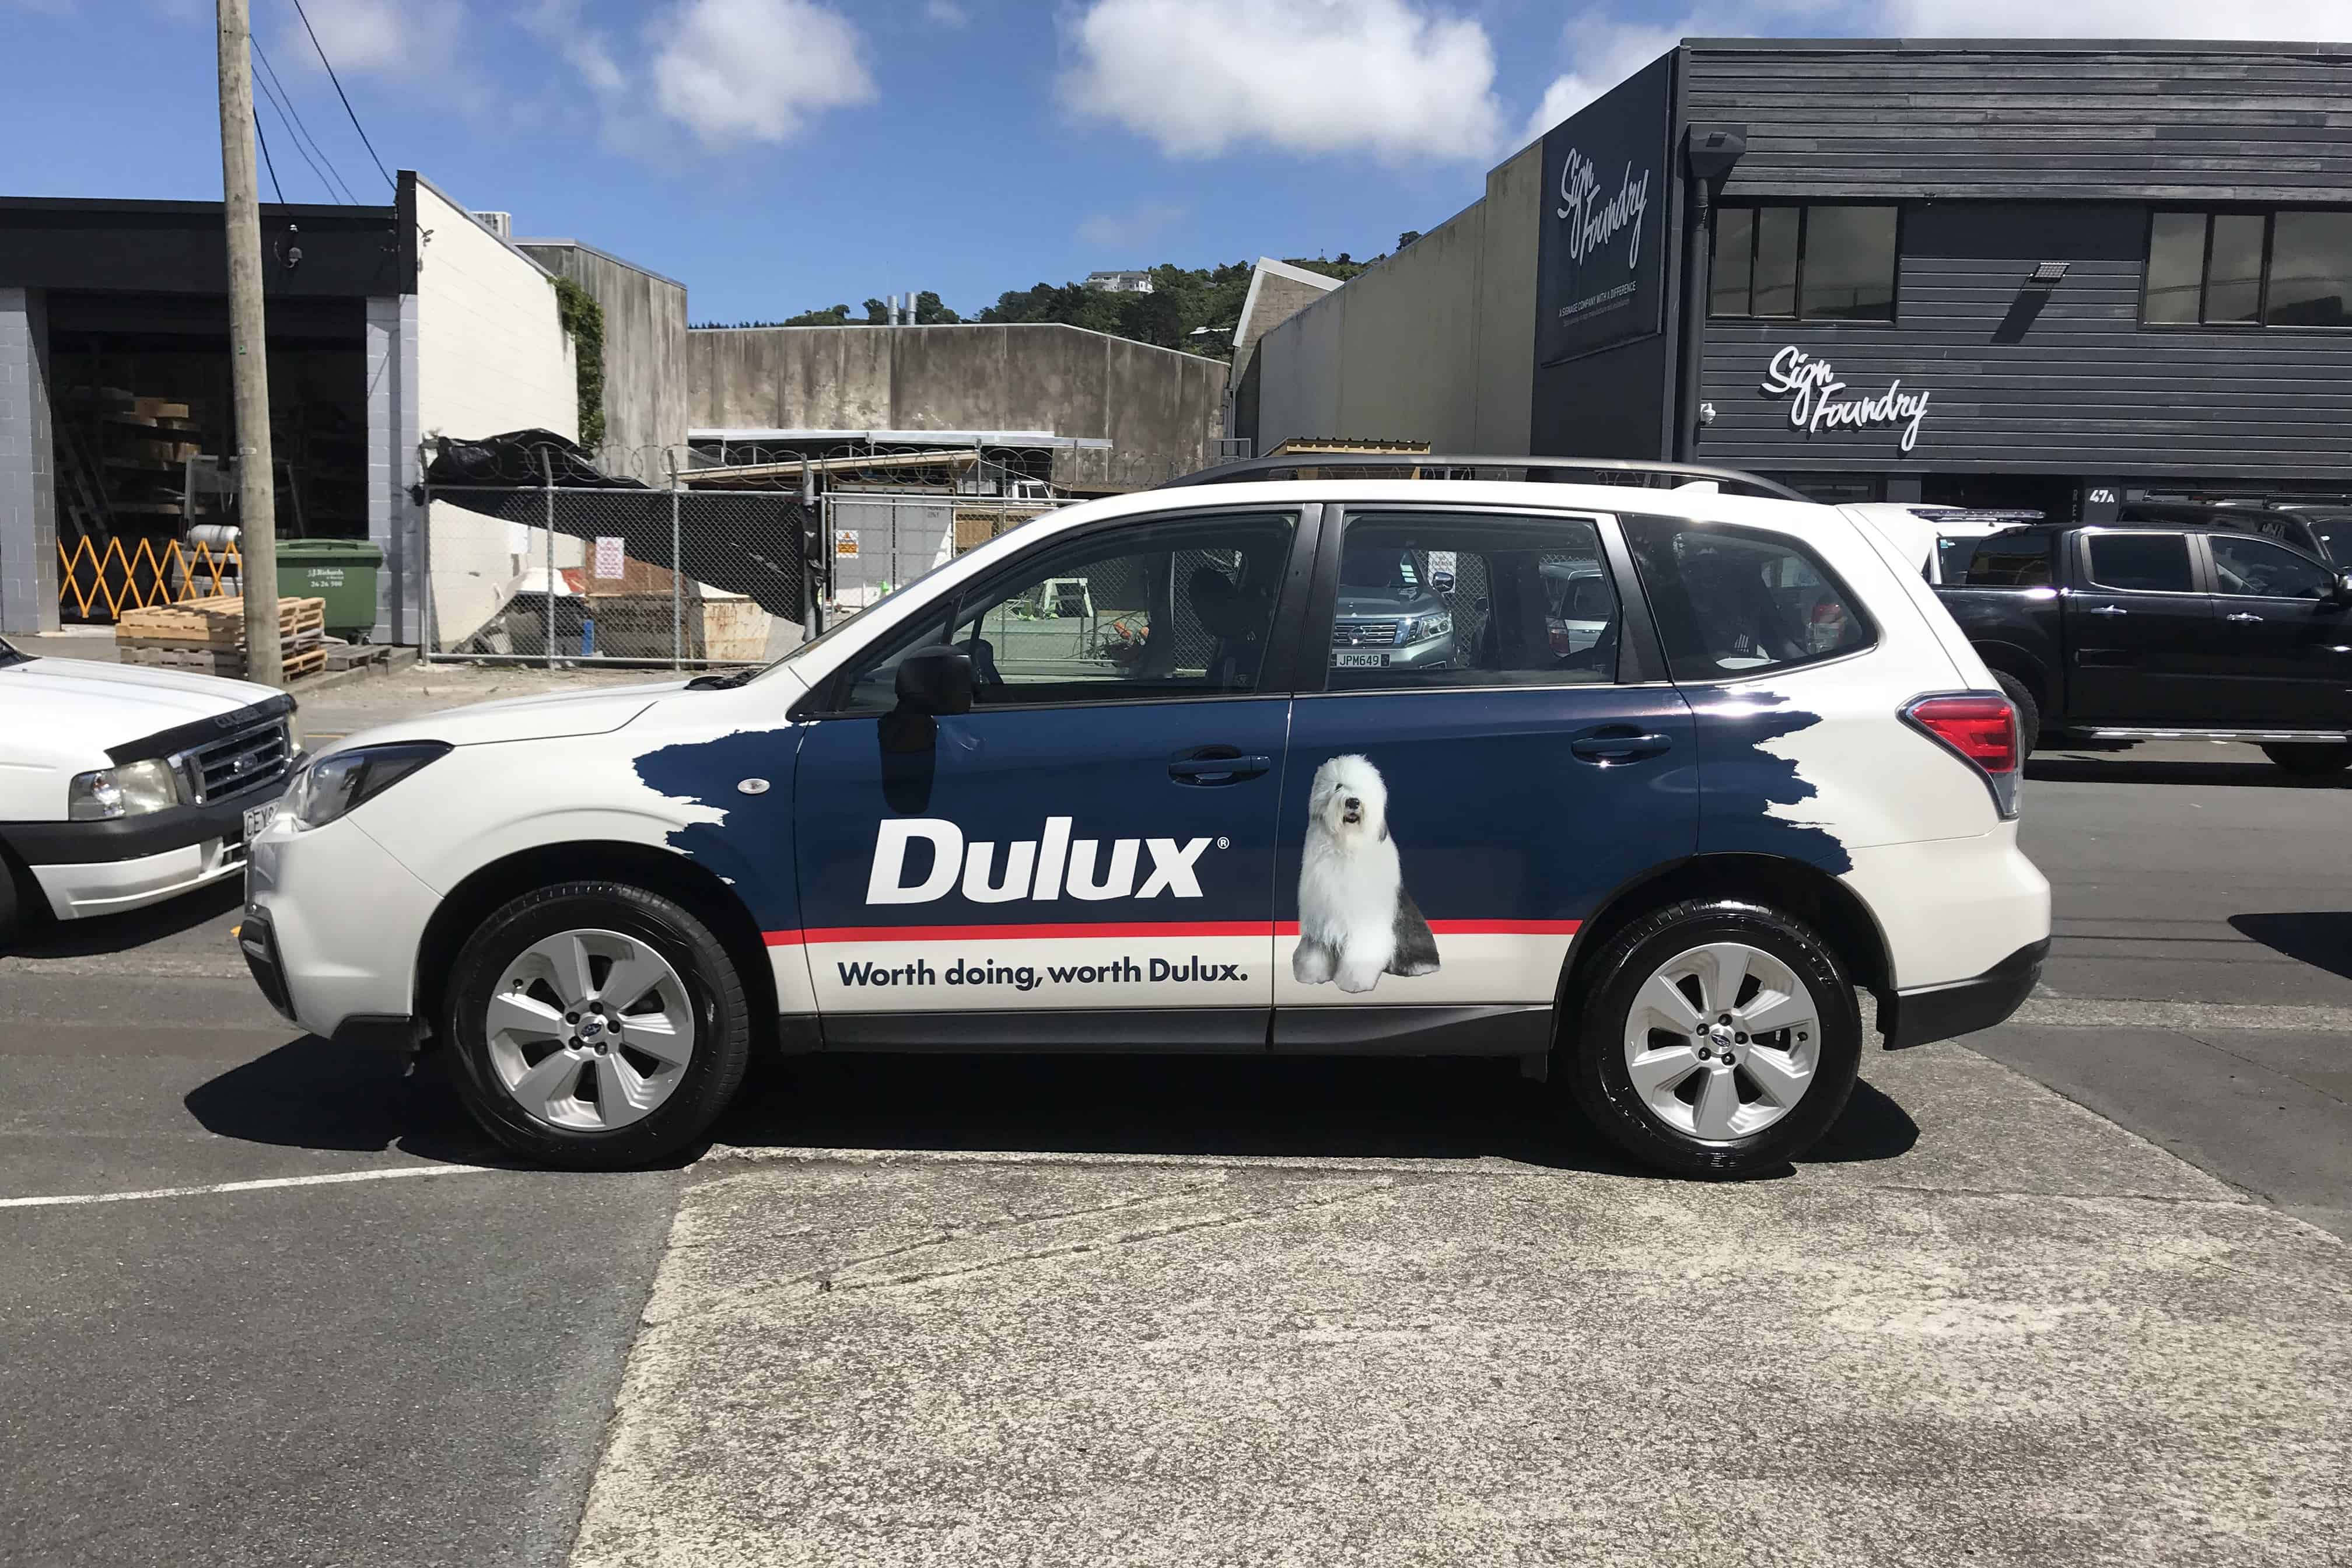  Dulux  Worth doing worth Dulux  Sign Foundry